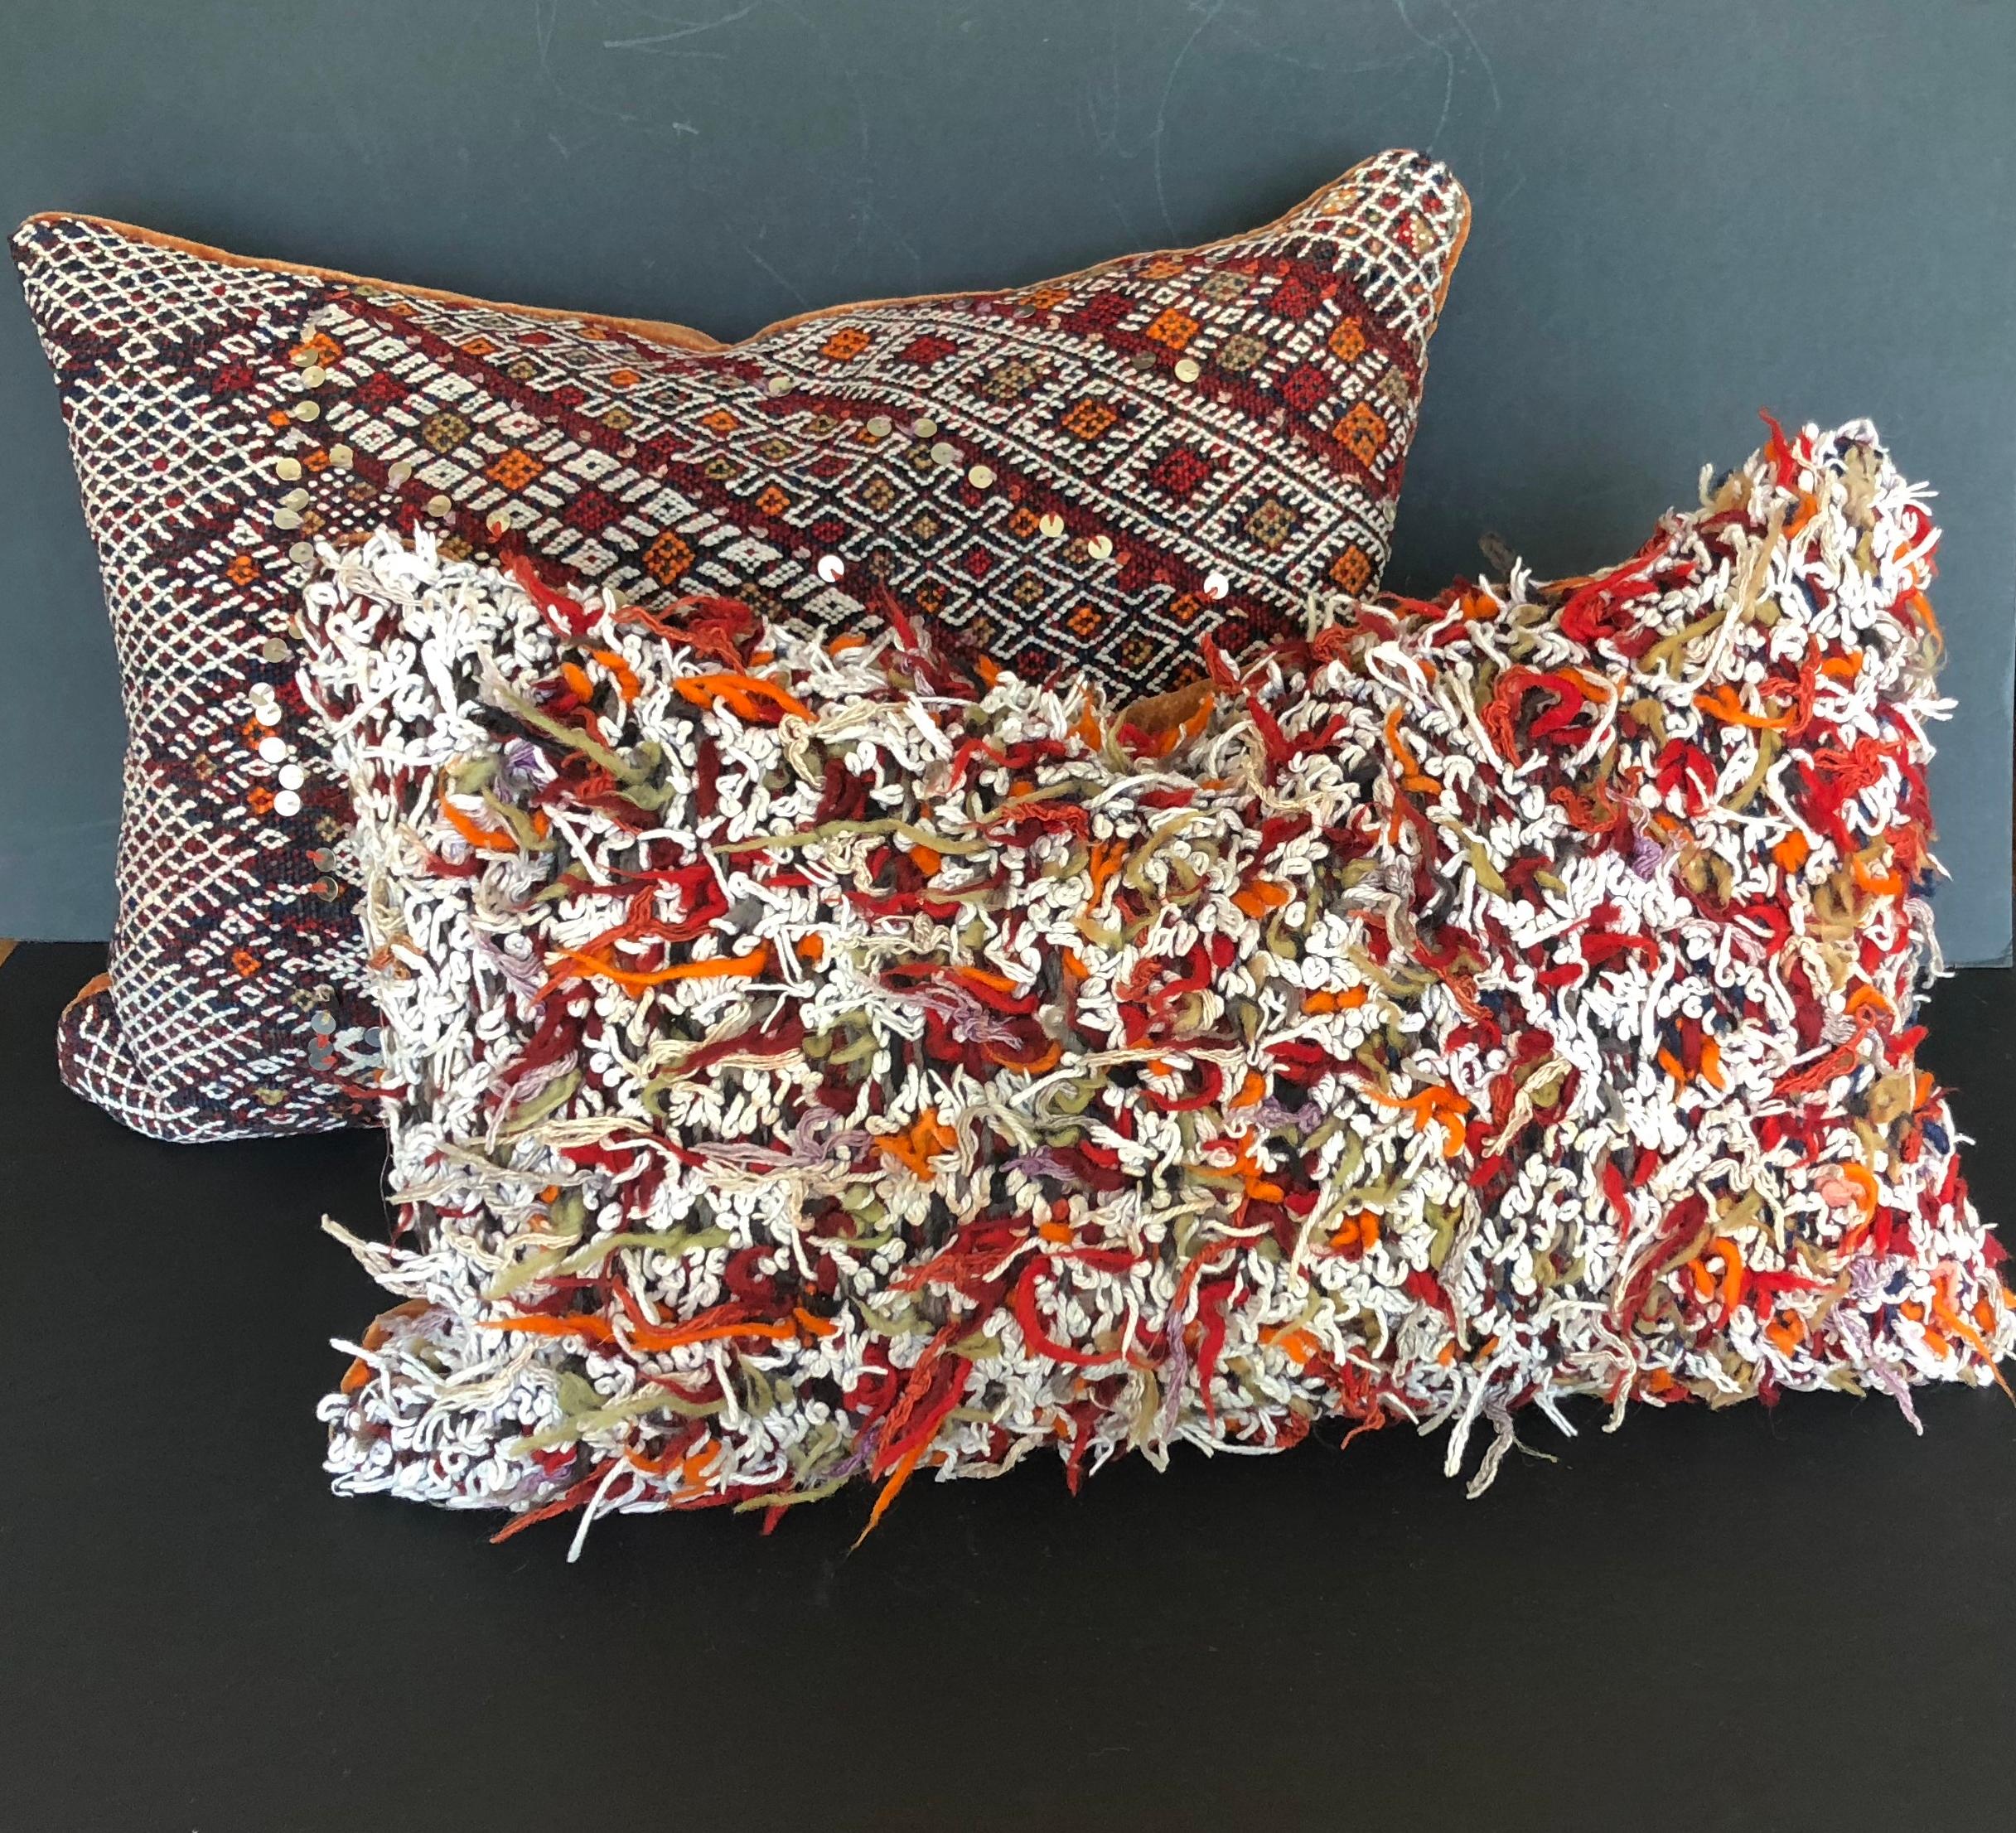 Custom pillow cut from a vintage hand loomed wool Moroccan Berber rug from the Atlas Mountains. The pillow is cut from the reverse side of the rug where all of the wool was left uncut after the weaving process. Pillow is backed in deep paprika